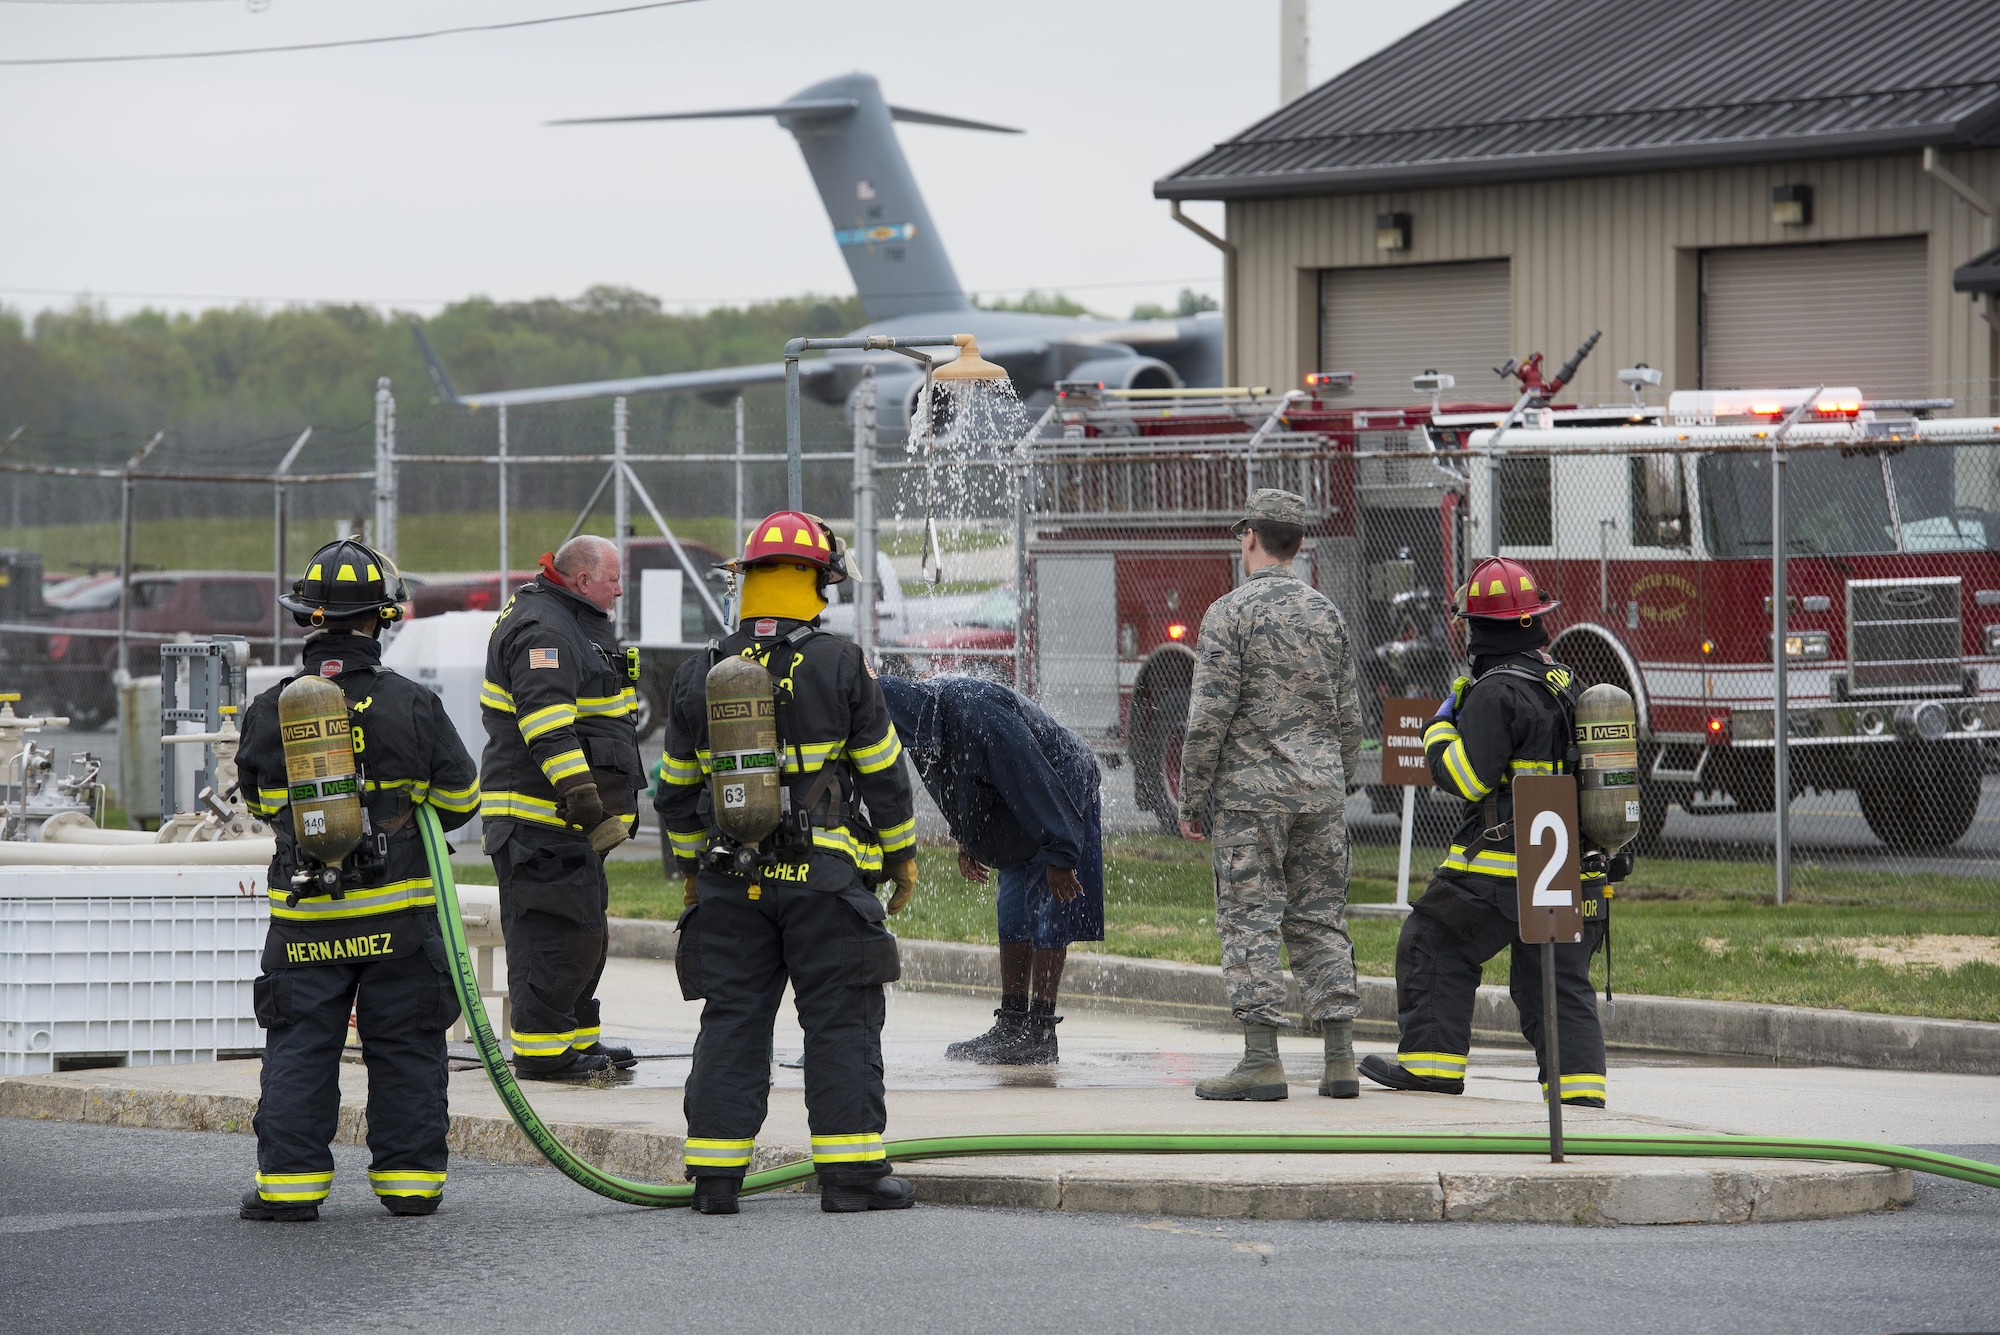 Firefighters assigned to the 436th Civil Engineer Squadron operate an emergency shower to remove simulated Jet-A fuel from a person who feigned full-body exposure during a fuel spill exercise April 20, 2017, at Dover Air Force Base, Del. After showering, members exposed to dermal contact with jet fuel or other hazardous materials require immediate medical evaluation and treatment. (U.S. Air Force photo by Senior Airman Aaron J. Jenne)